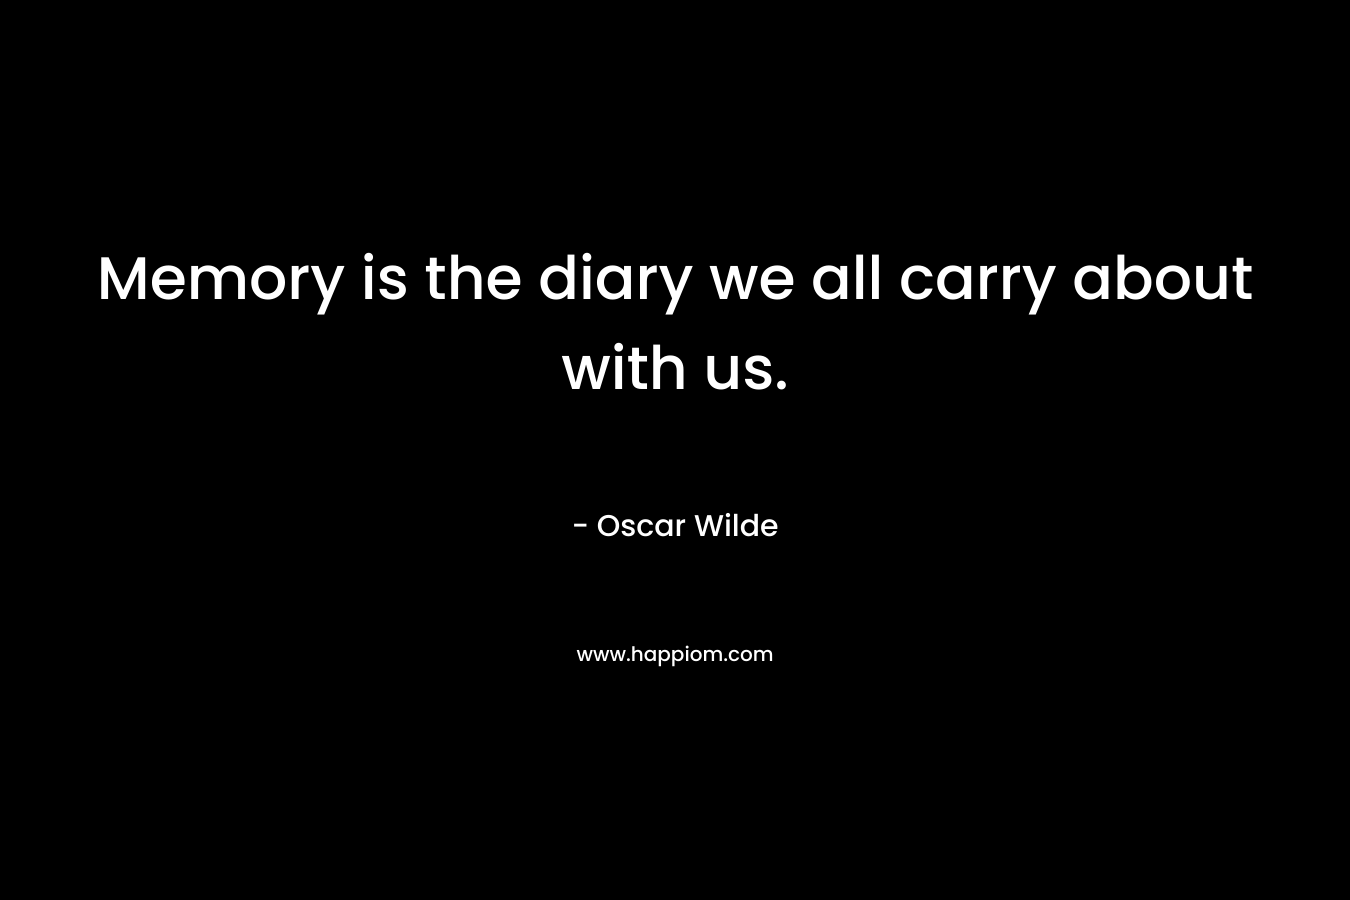 Memory is the diary we all carry about with us. – Oscar Wilde